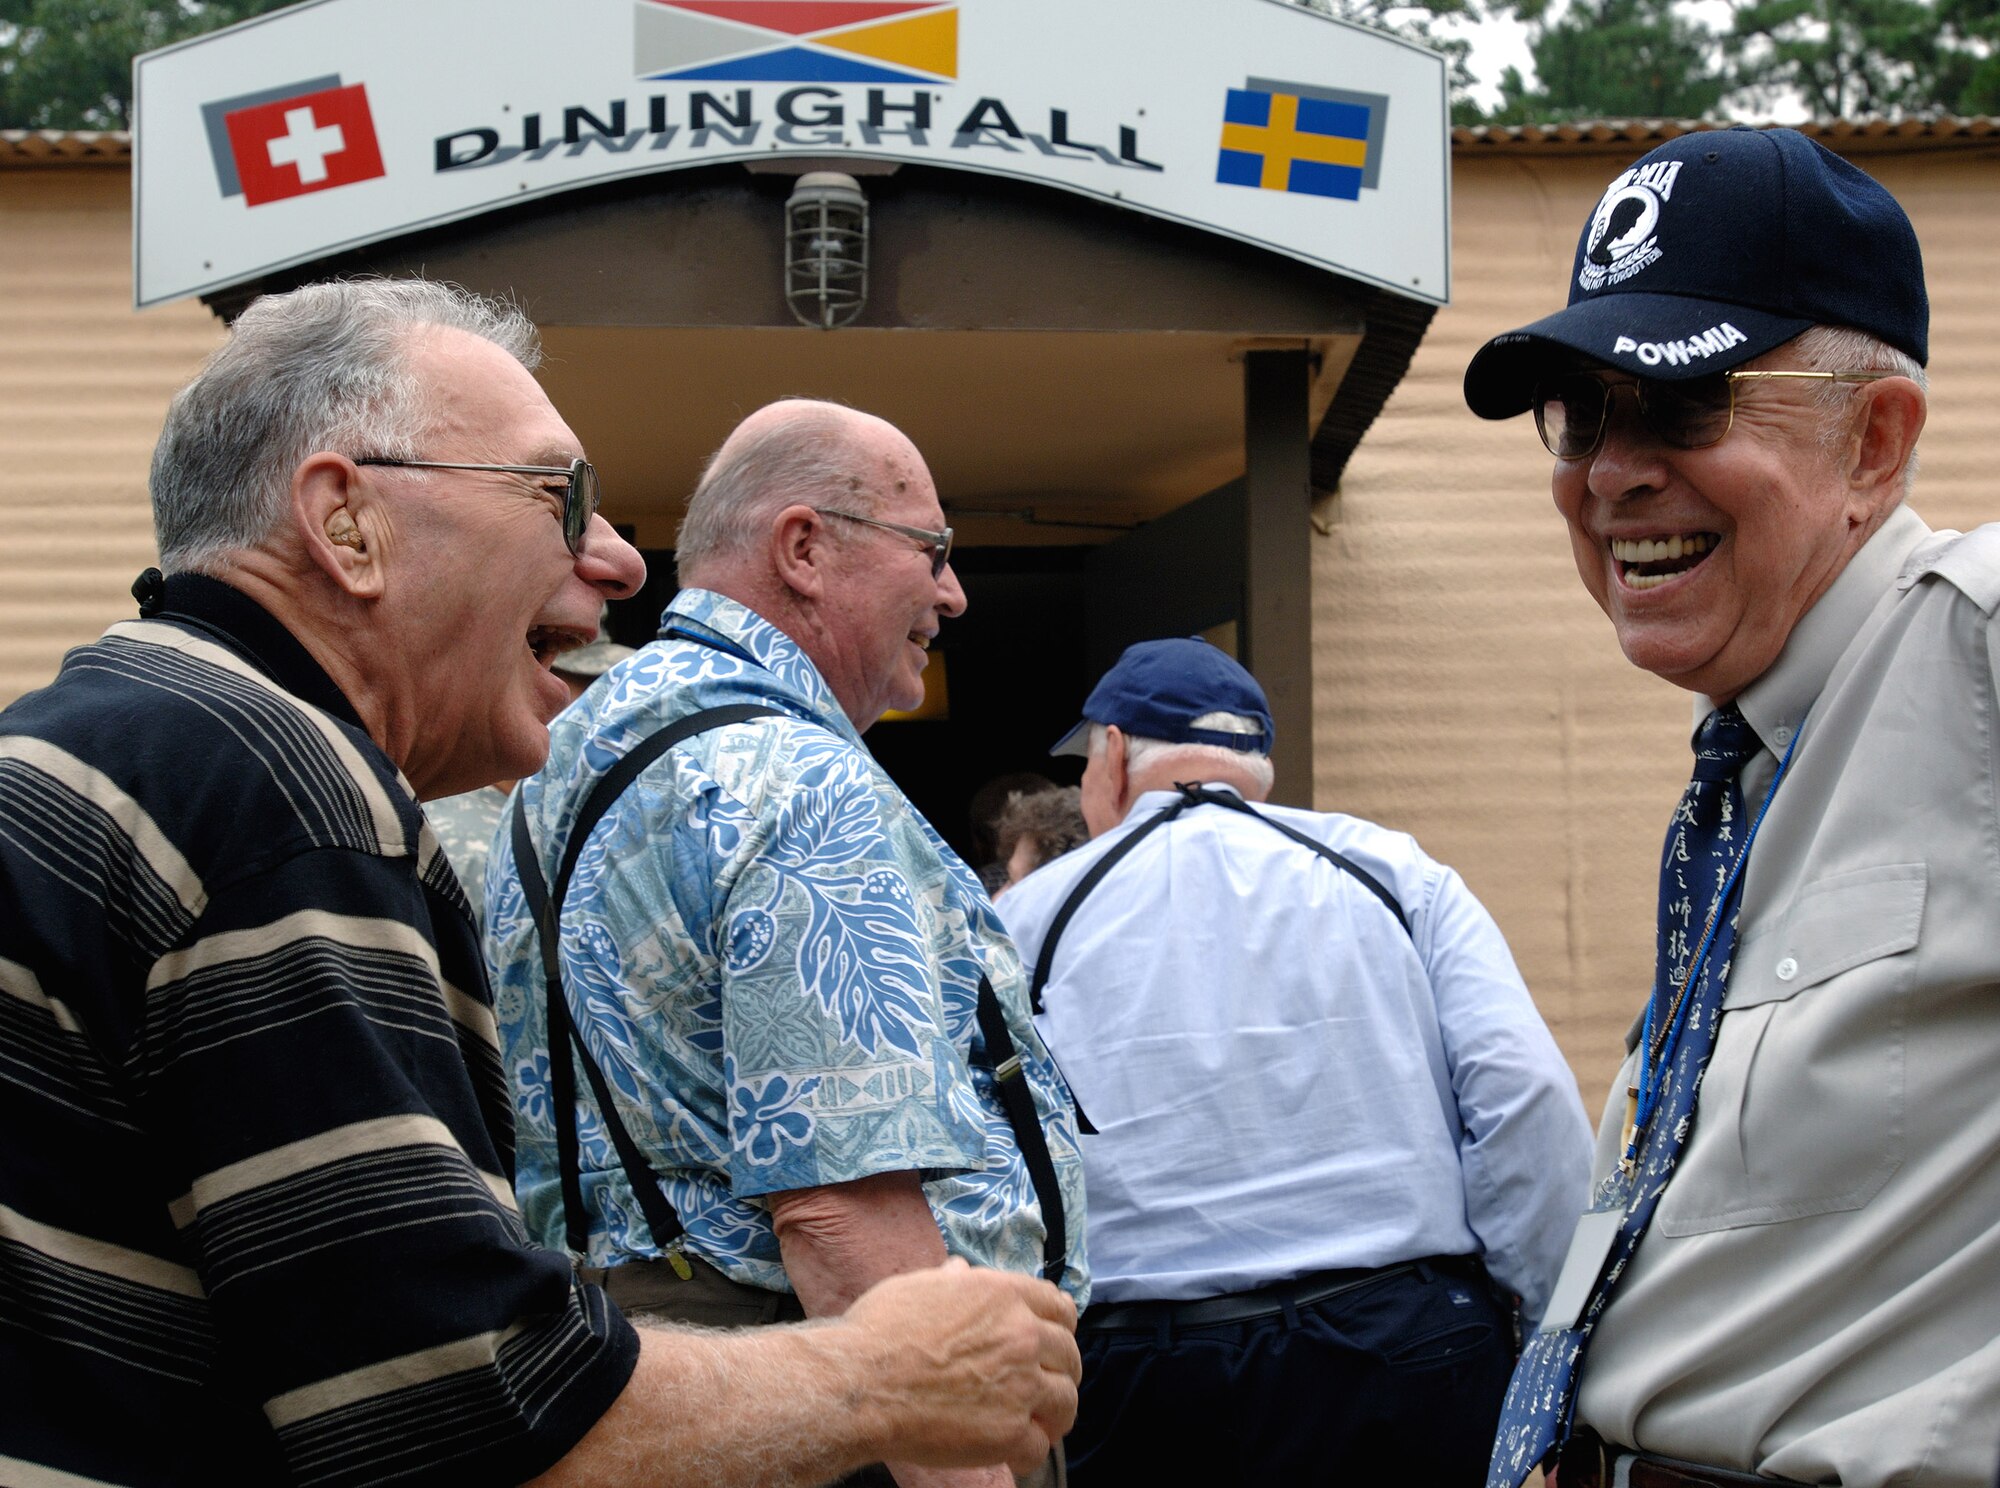 Just like old times, Donald Krueger (left) shares stories and cracks jokes while in a line for the dinning hall with retired Lt. Col. Harold Fischer during a Sept. 13 tour held to honor Korean War veterans in Panmunjeom, South Korea. Colonel Fischer is a double ace fighter pilot from the war. Mr. Krueger was an enlisted munitions specialist during the Korean War. The two had not seen each other in 55 years. The joint security area is the only place where North and South Korea connect. Air Force Korean War veterans are visiting South Korea during a weeklong tour in observance of the Air Force's 60th Anniversary. (U.S. Air Force photo/Staff Sgt. Bennie J. Davis III) 
